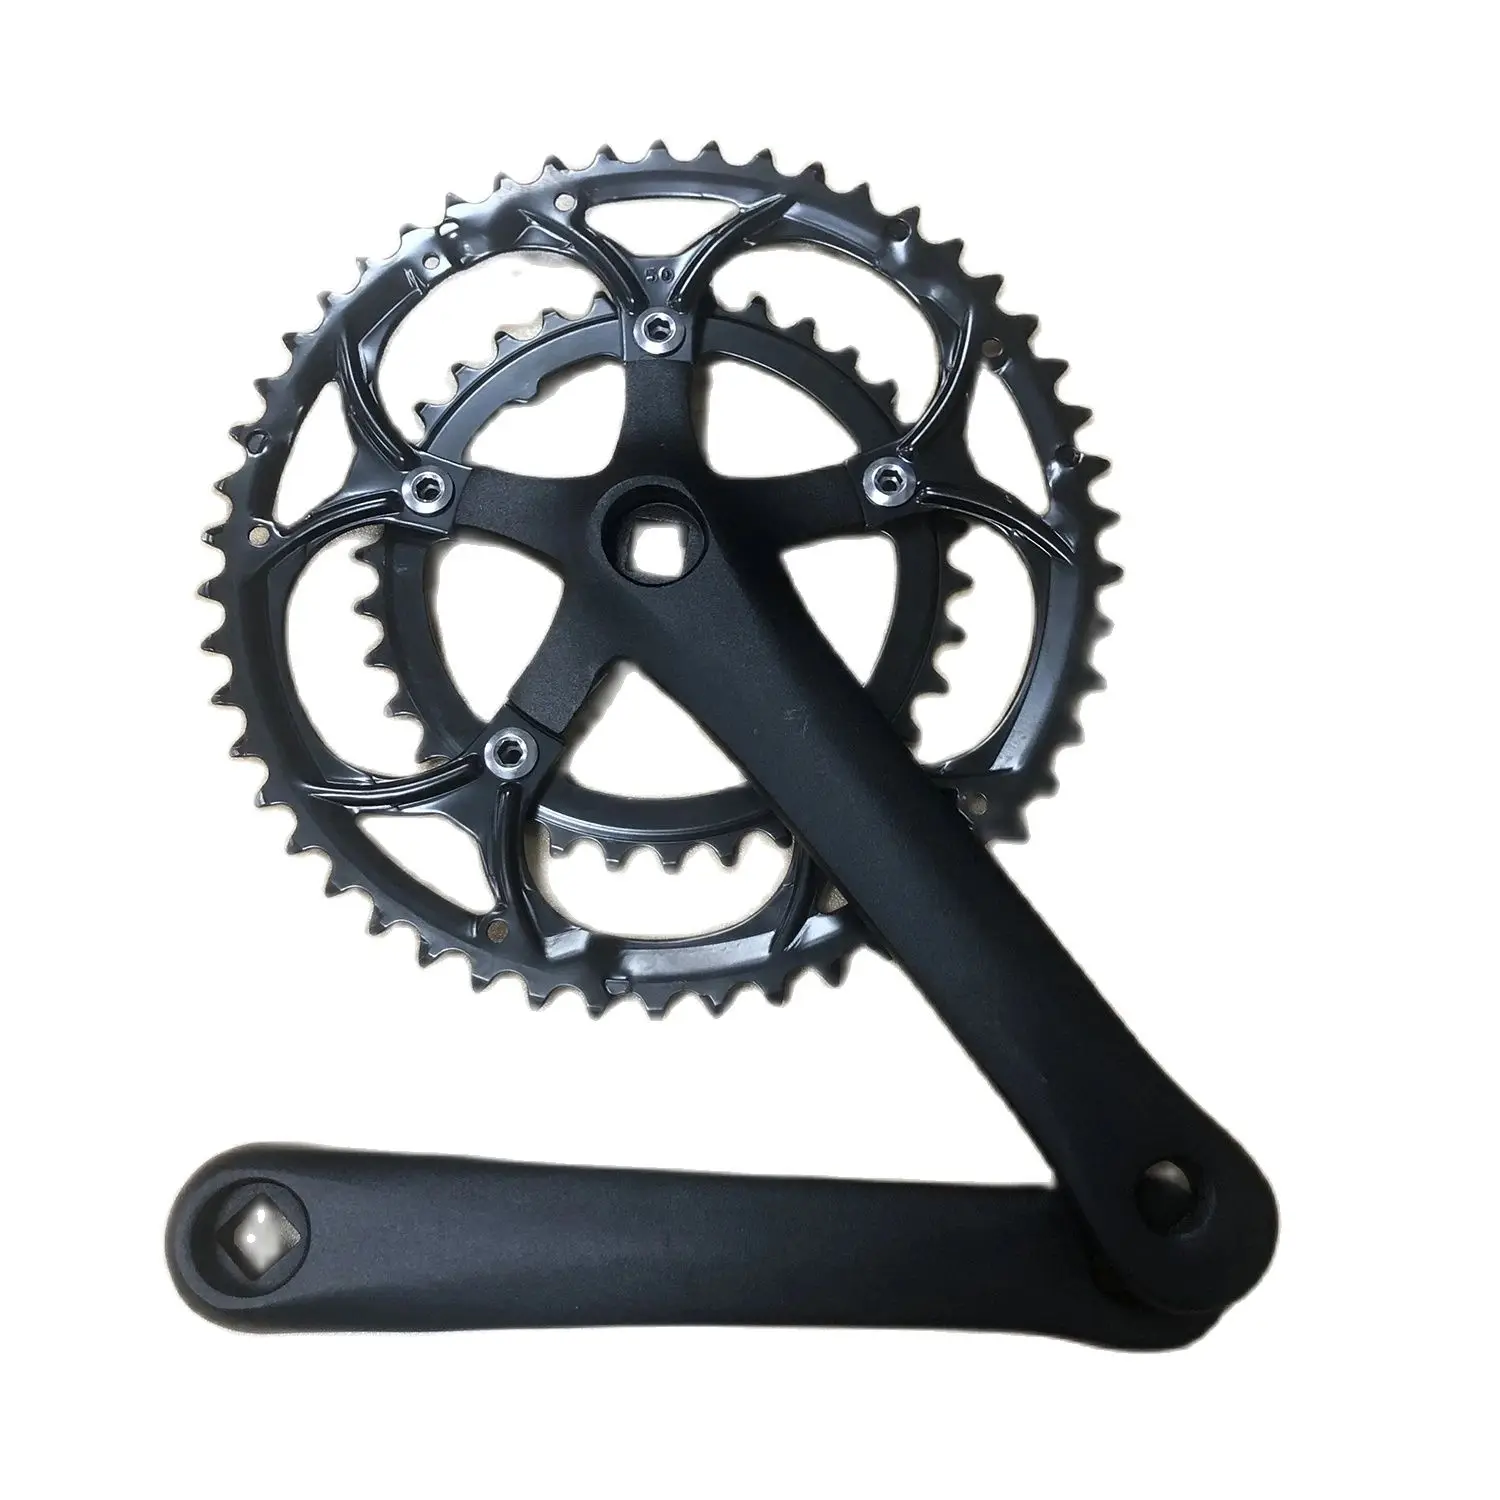 

Road Bike Crankset High-end Chainwheel Bicycle Aluminum Alloy 50-34T 8/9S Chainring Square Hole Racing 170mm Crank Cycling Parts